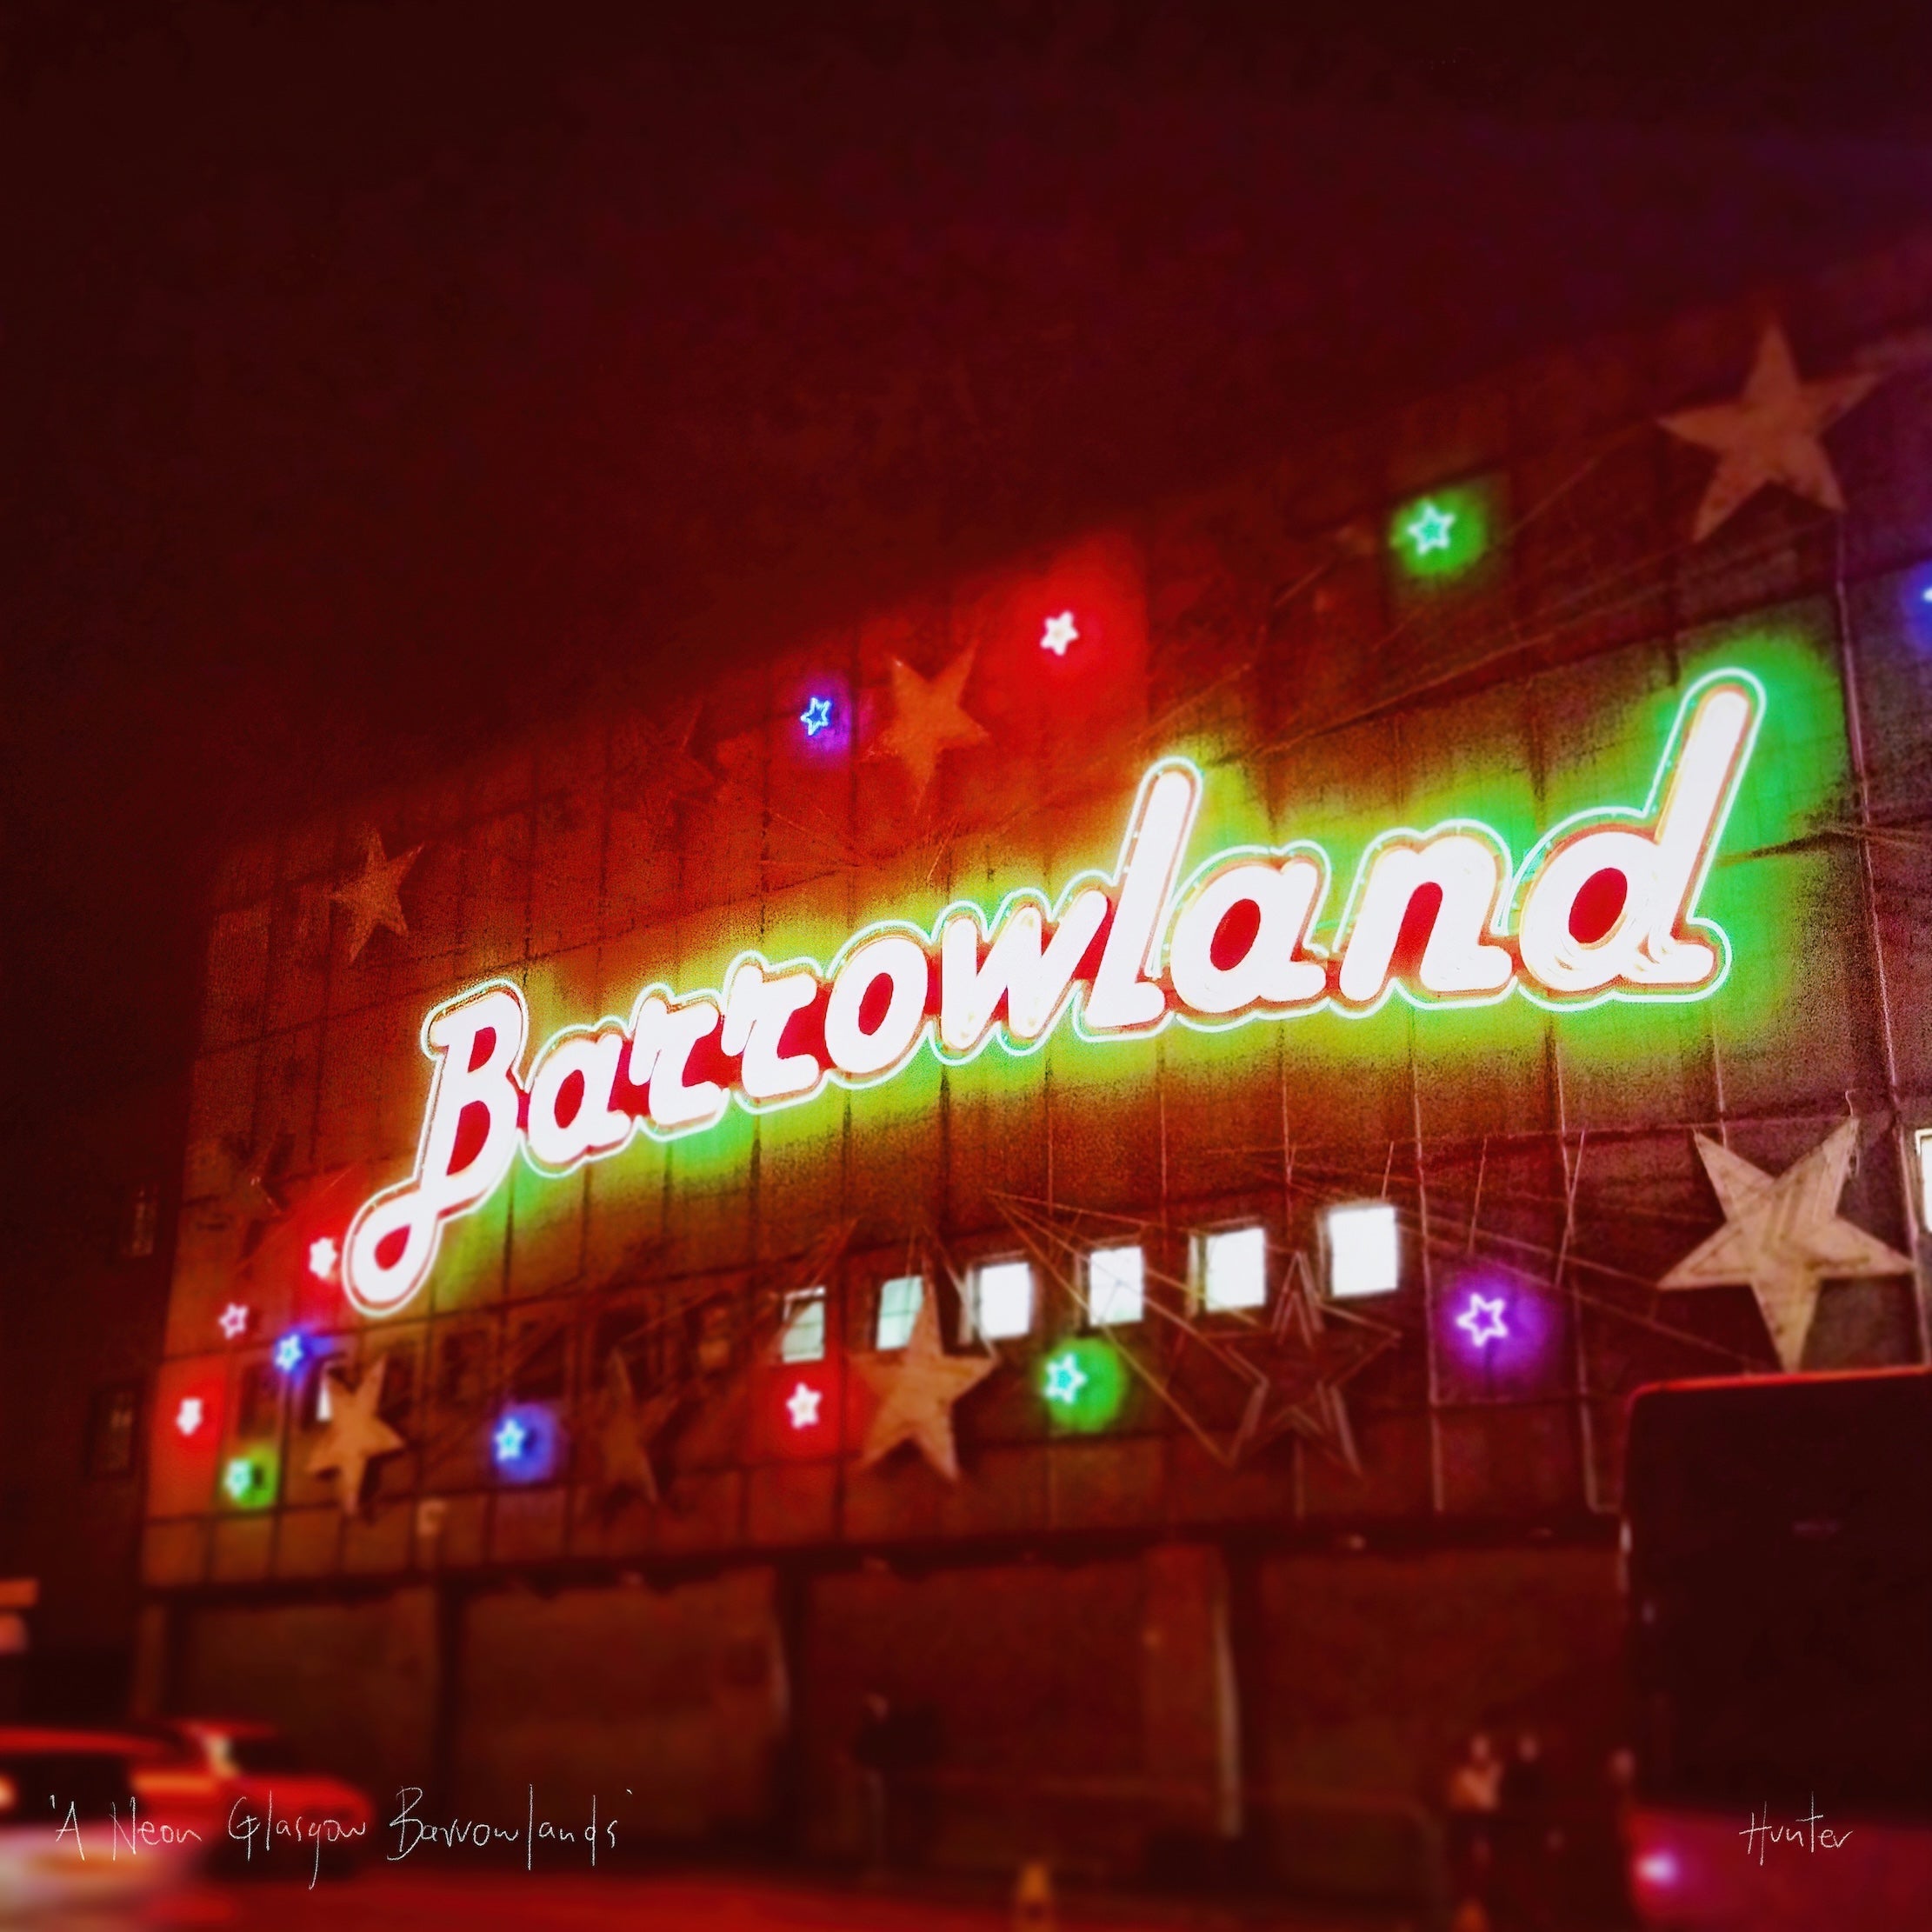 A Neon Glasgow Barrowlands | Scotland In Your Pocket Art Print-Scotland In Your Pocket Framed Prints-Edinburgh & Glasgow Art Gallery-Paintings, Prints, Homeware, Art Gifts From Scotland By Scottish Artist Kevin Hunter